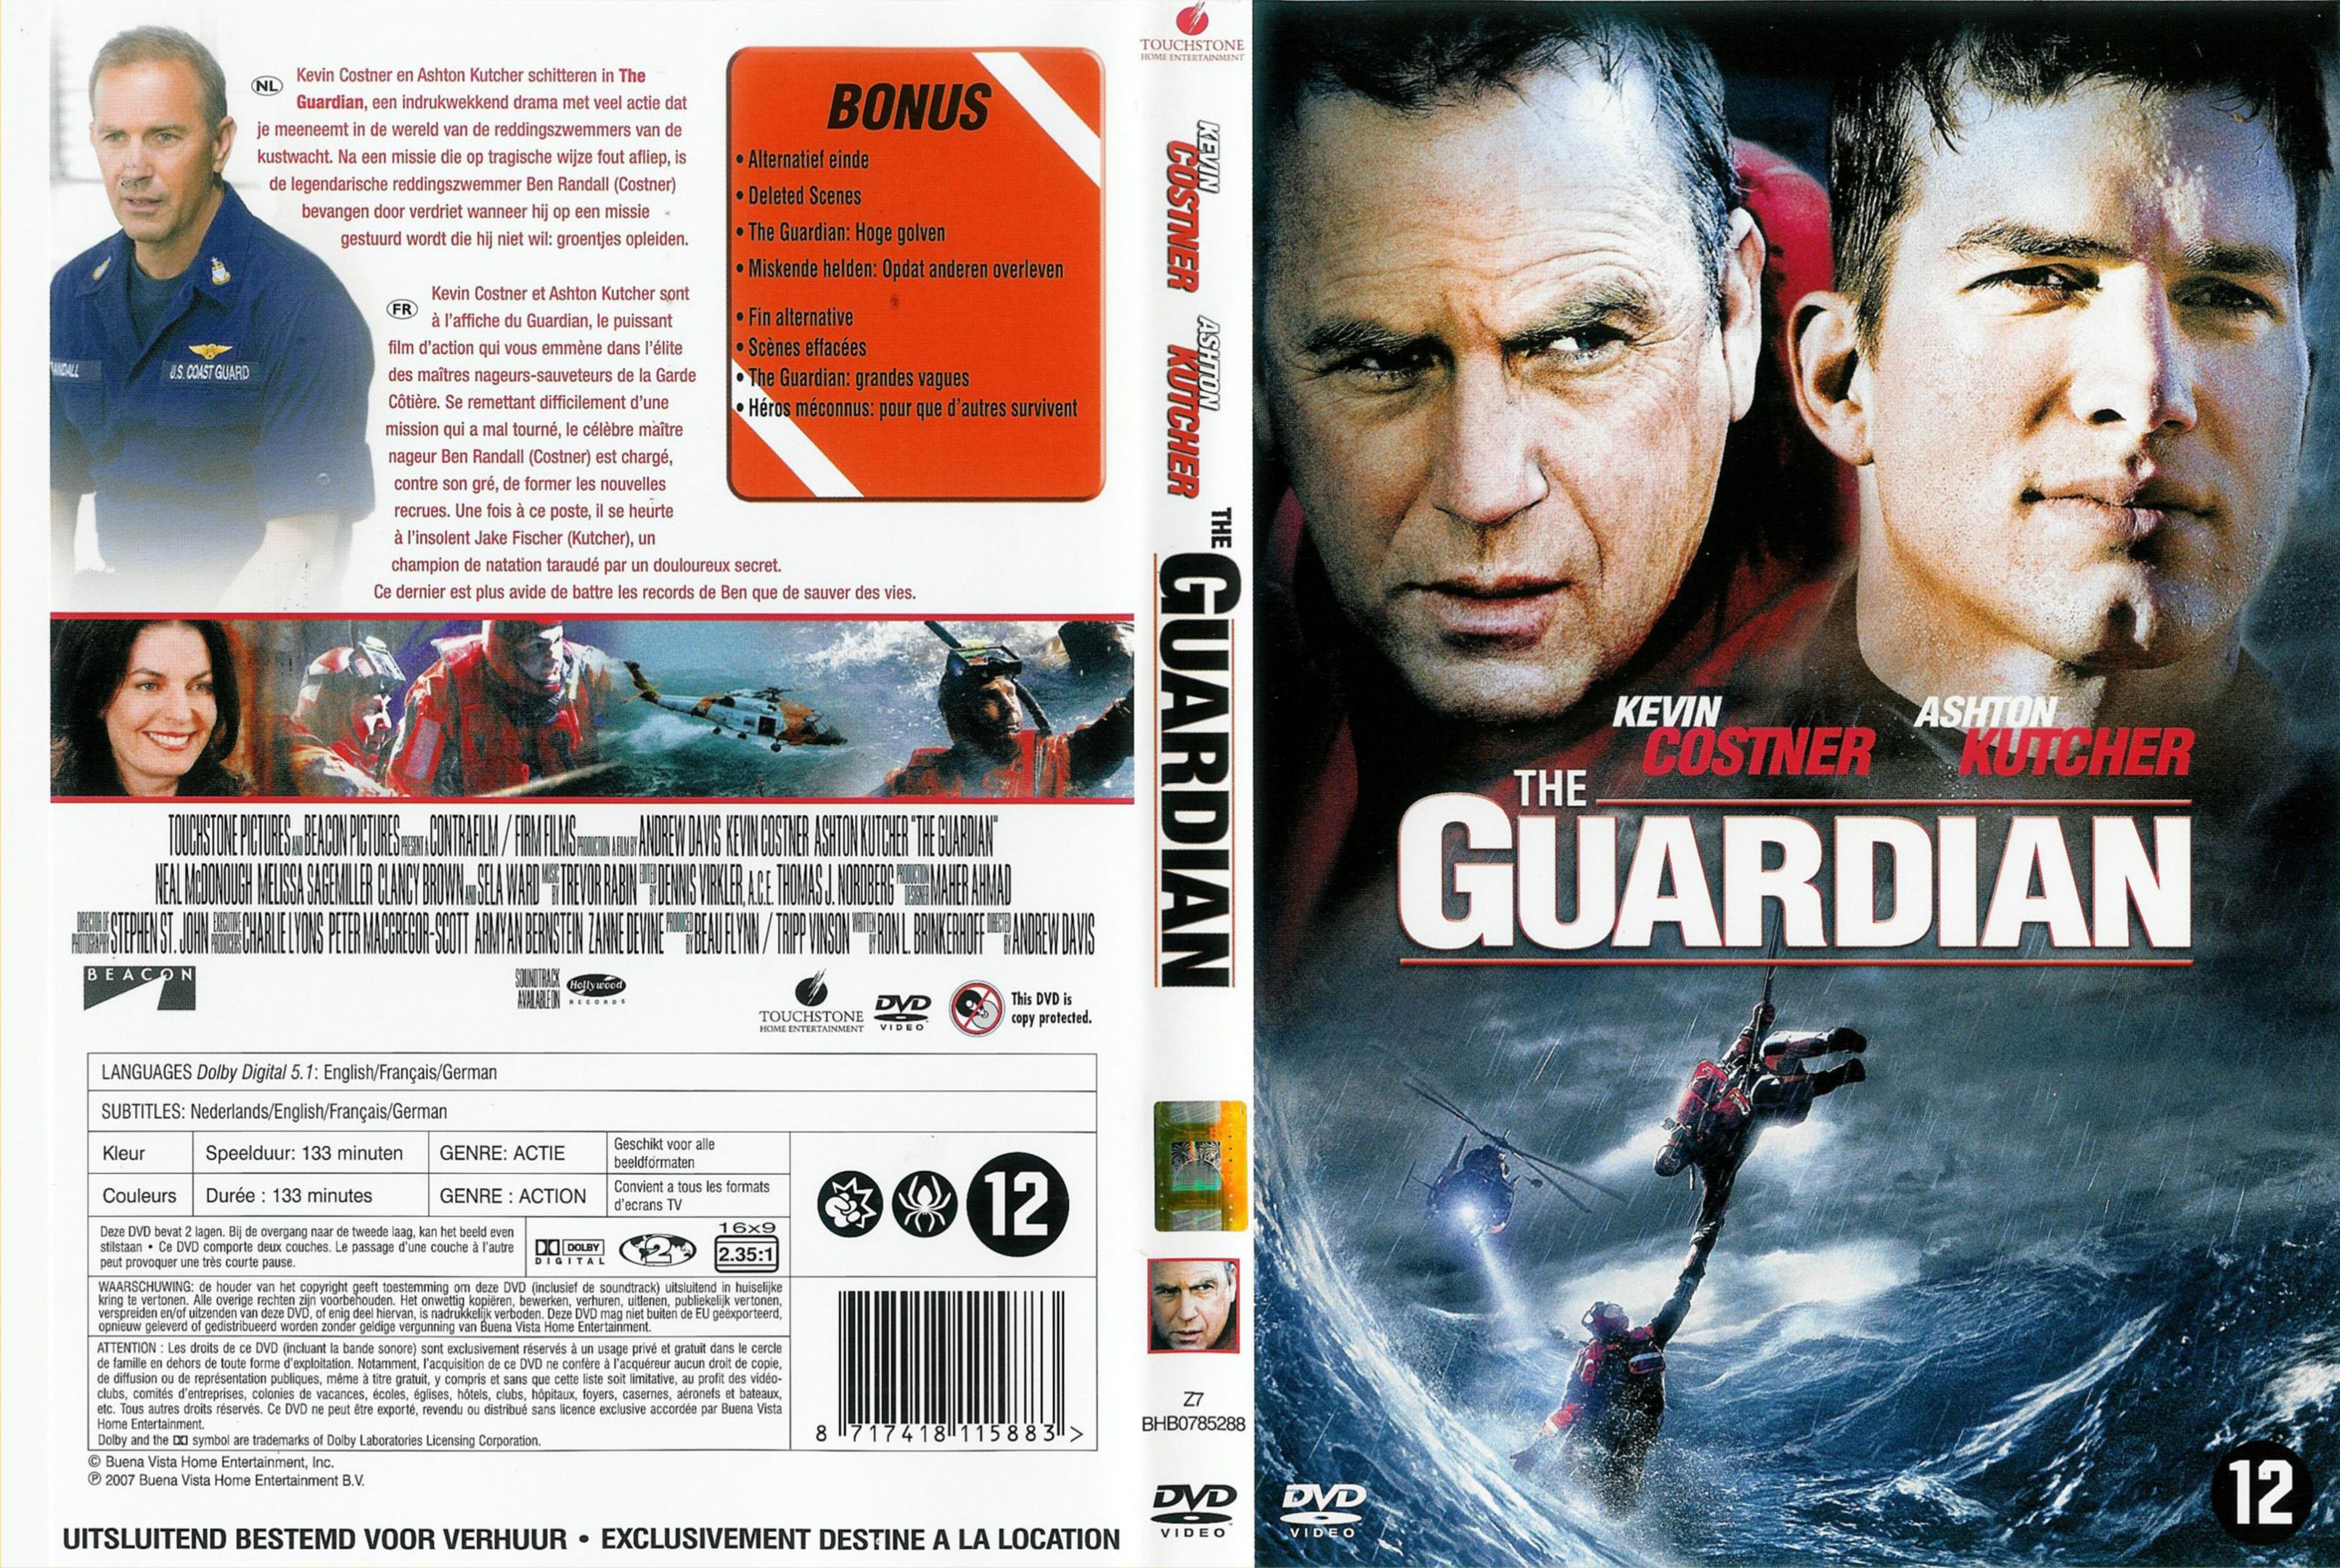 Jaquette DVD The guardian